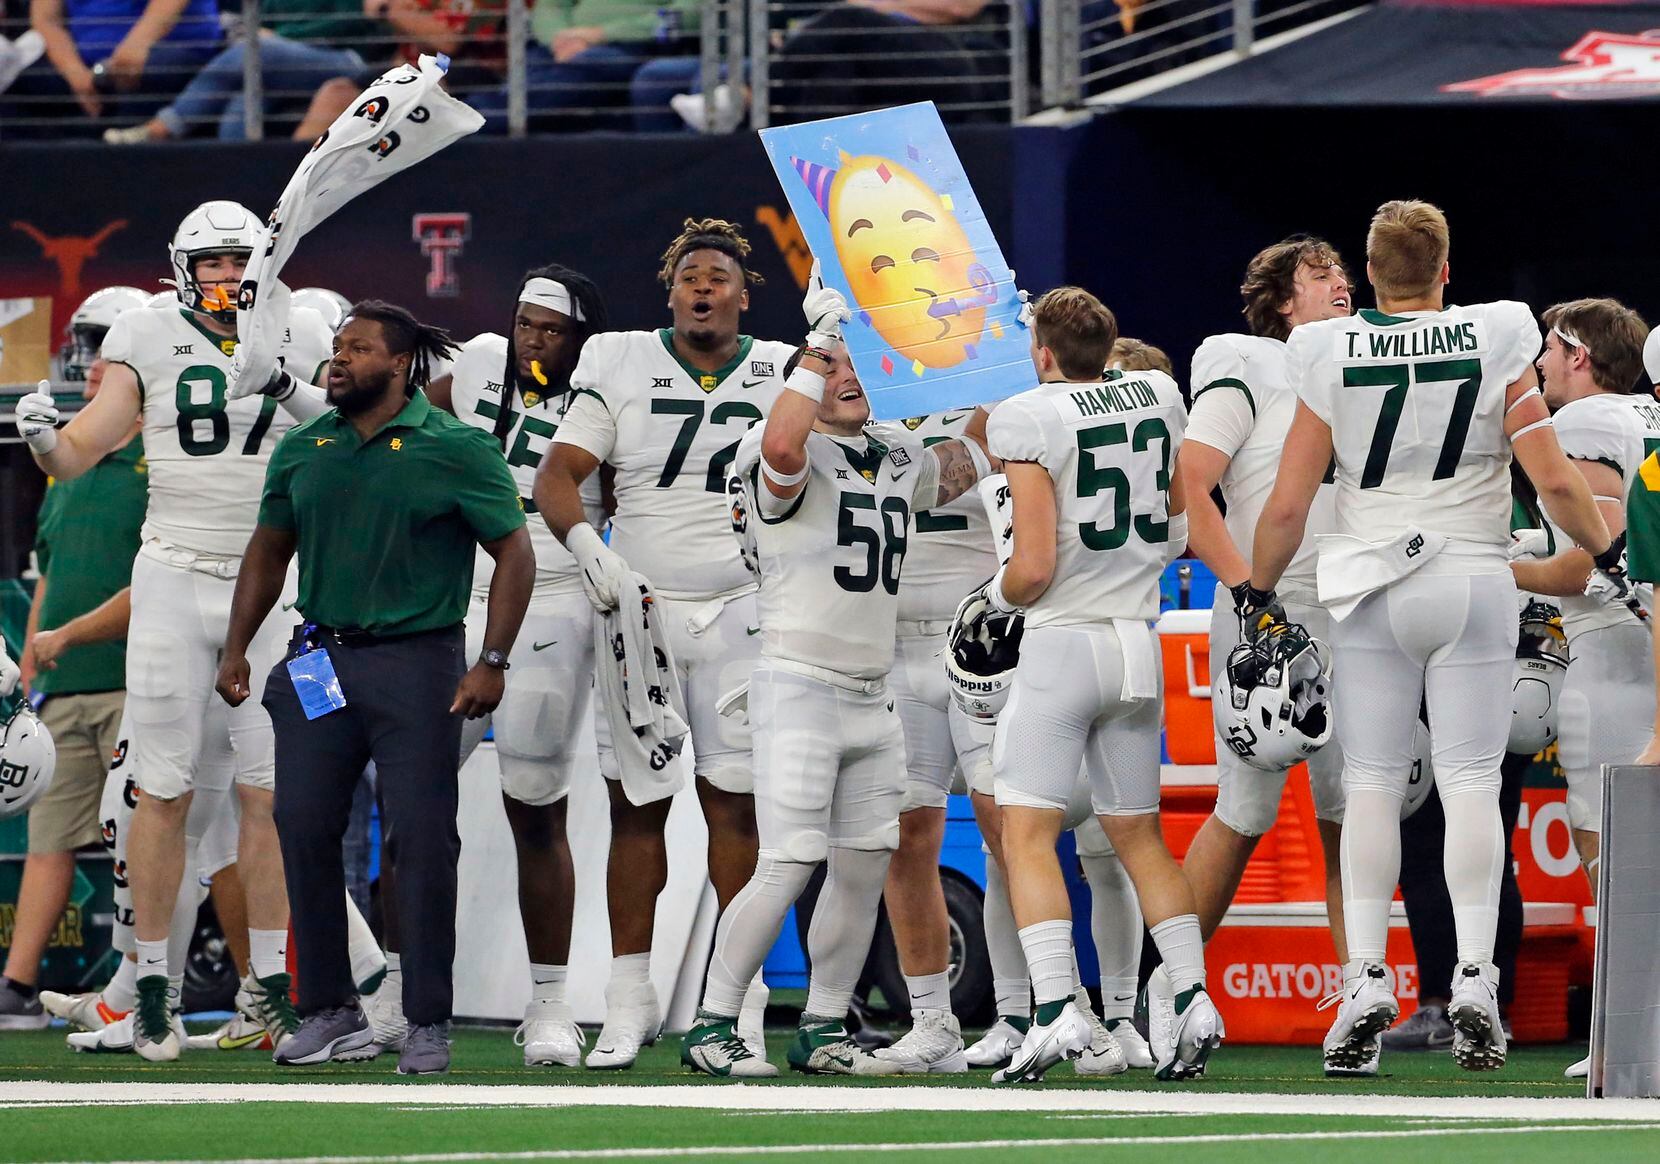 It seems like party time on the Baylor bench, as the bears pull ahead during first half of the Big 12 Championship football game between Oklahoma State and Baylor at AT&T Stadium in Arlington on Saturday, December 4, 2021. (John F. Rhodes / Special Contributor)